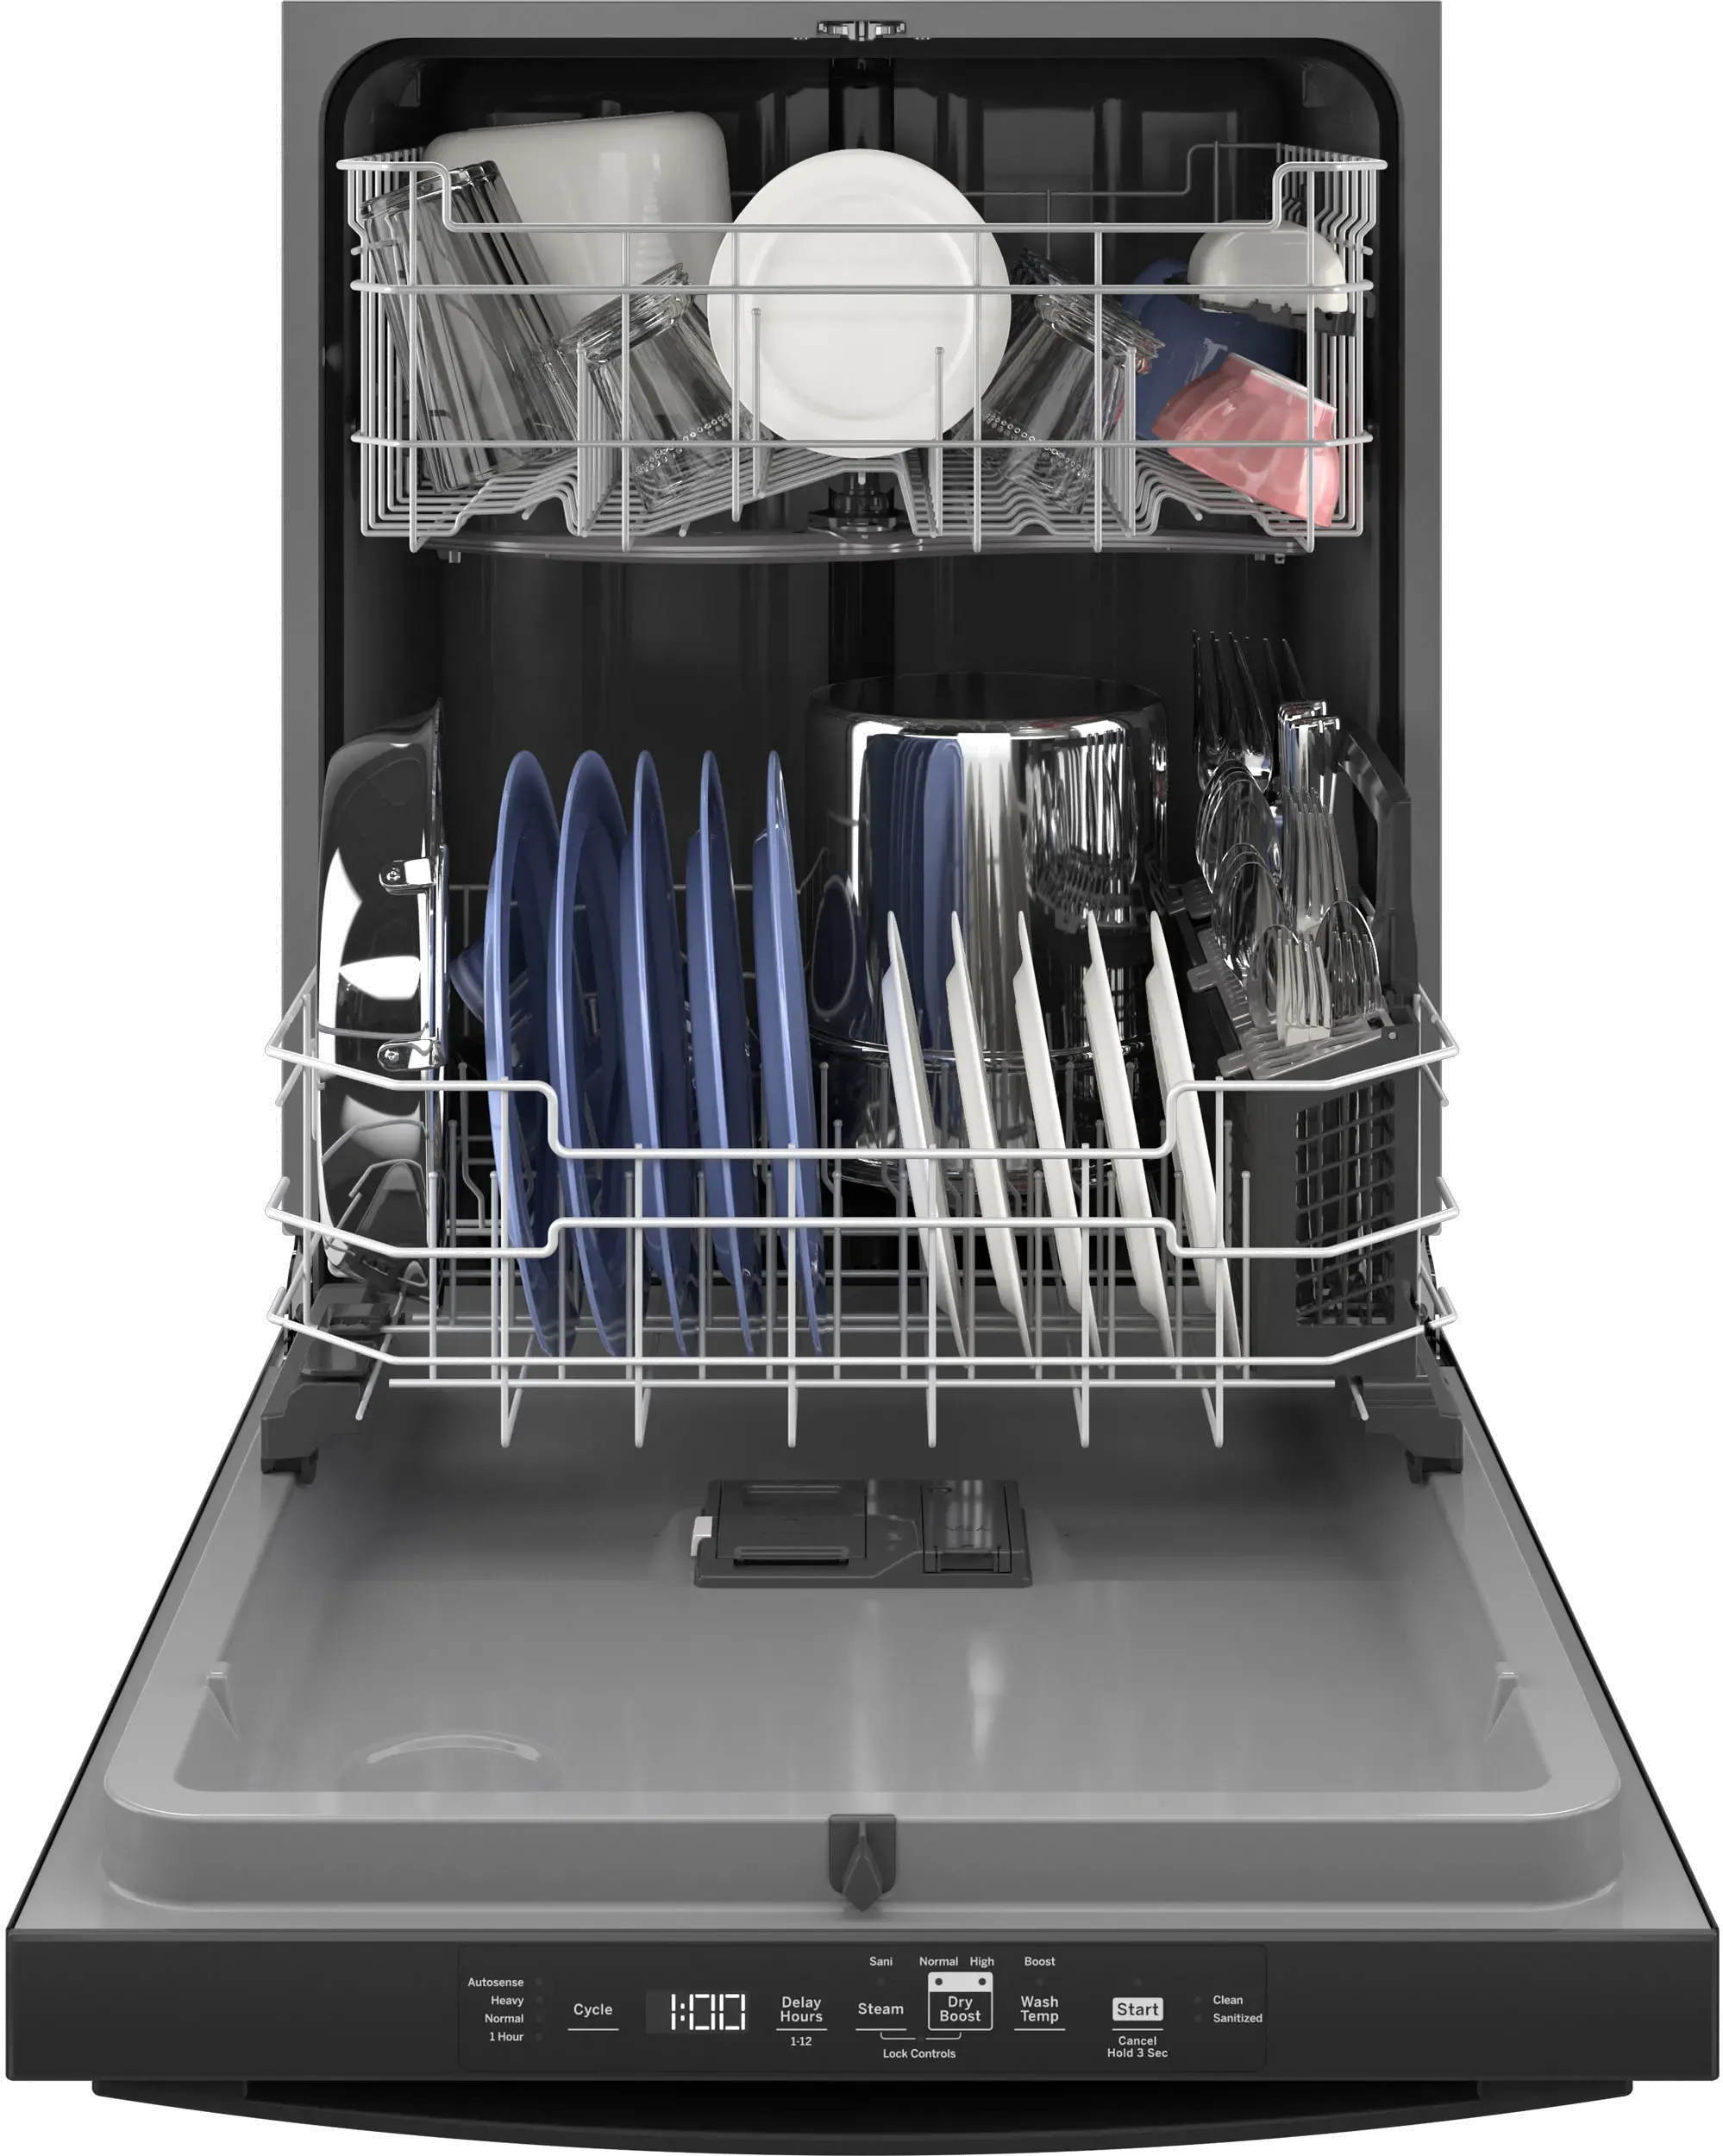 GE Top Control Dishwasher GDT550PGRBB